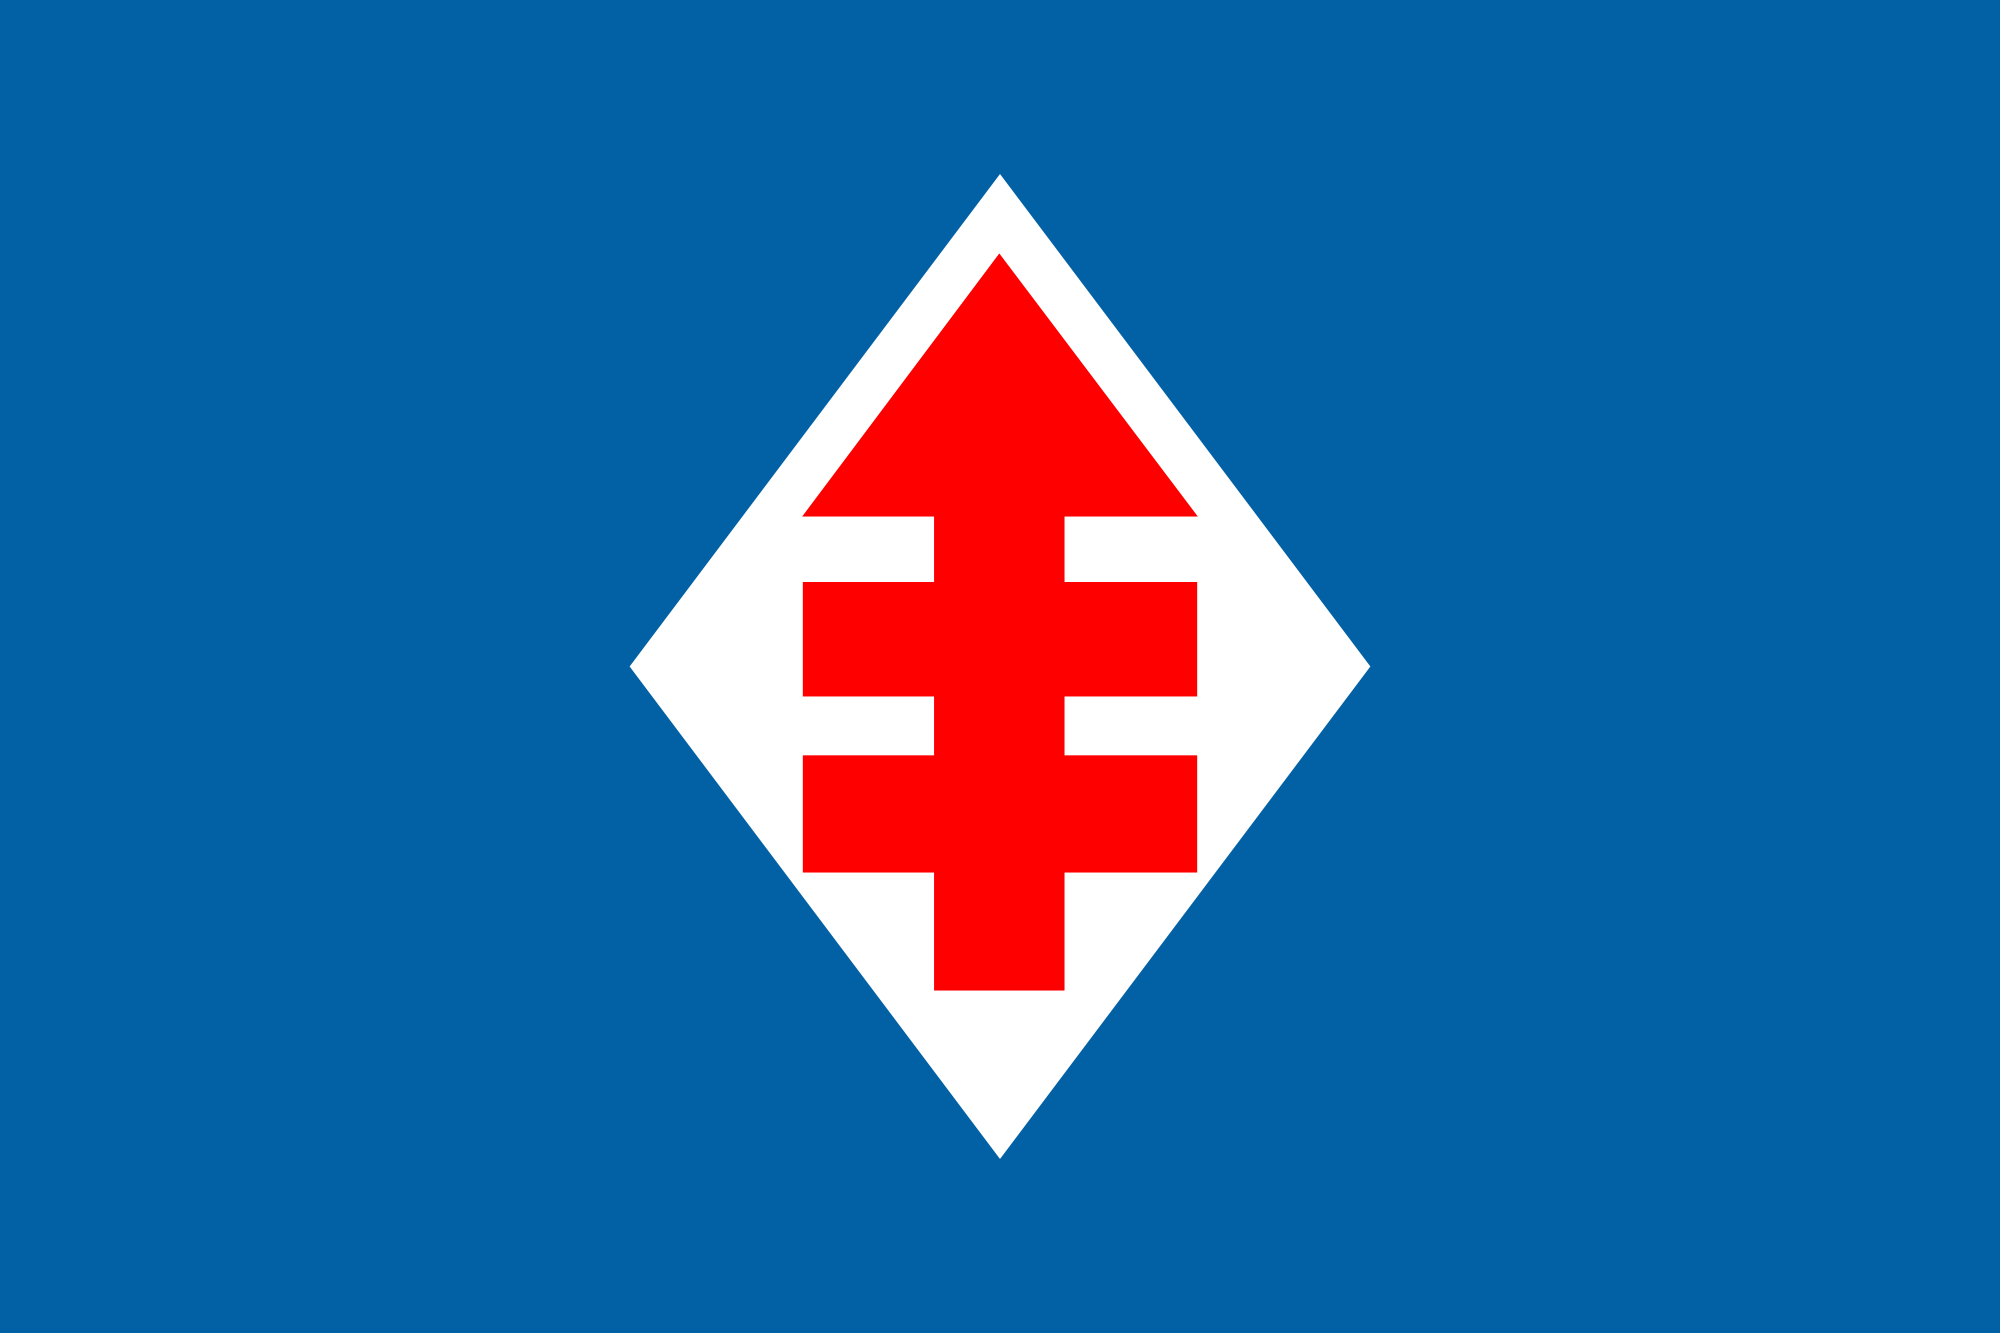 Christian Democratic Party (Chile) - Wikipedia, the free encyclopedia